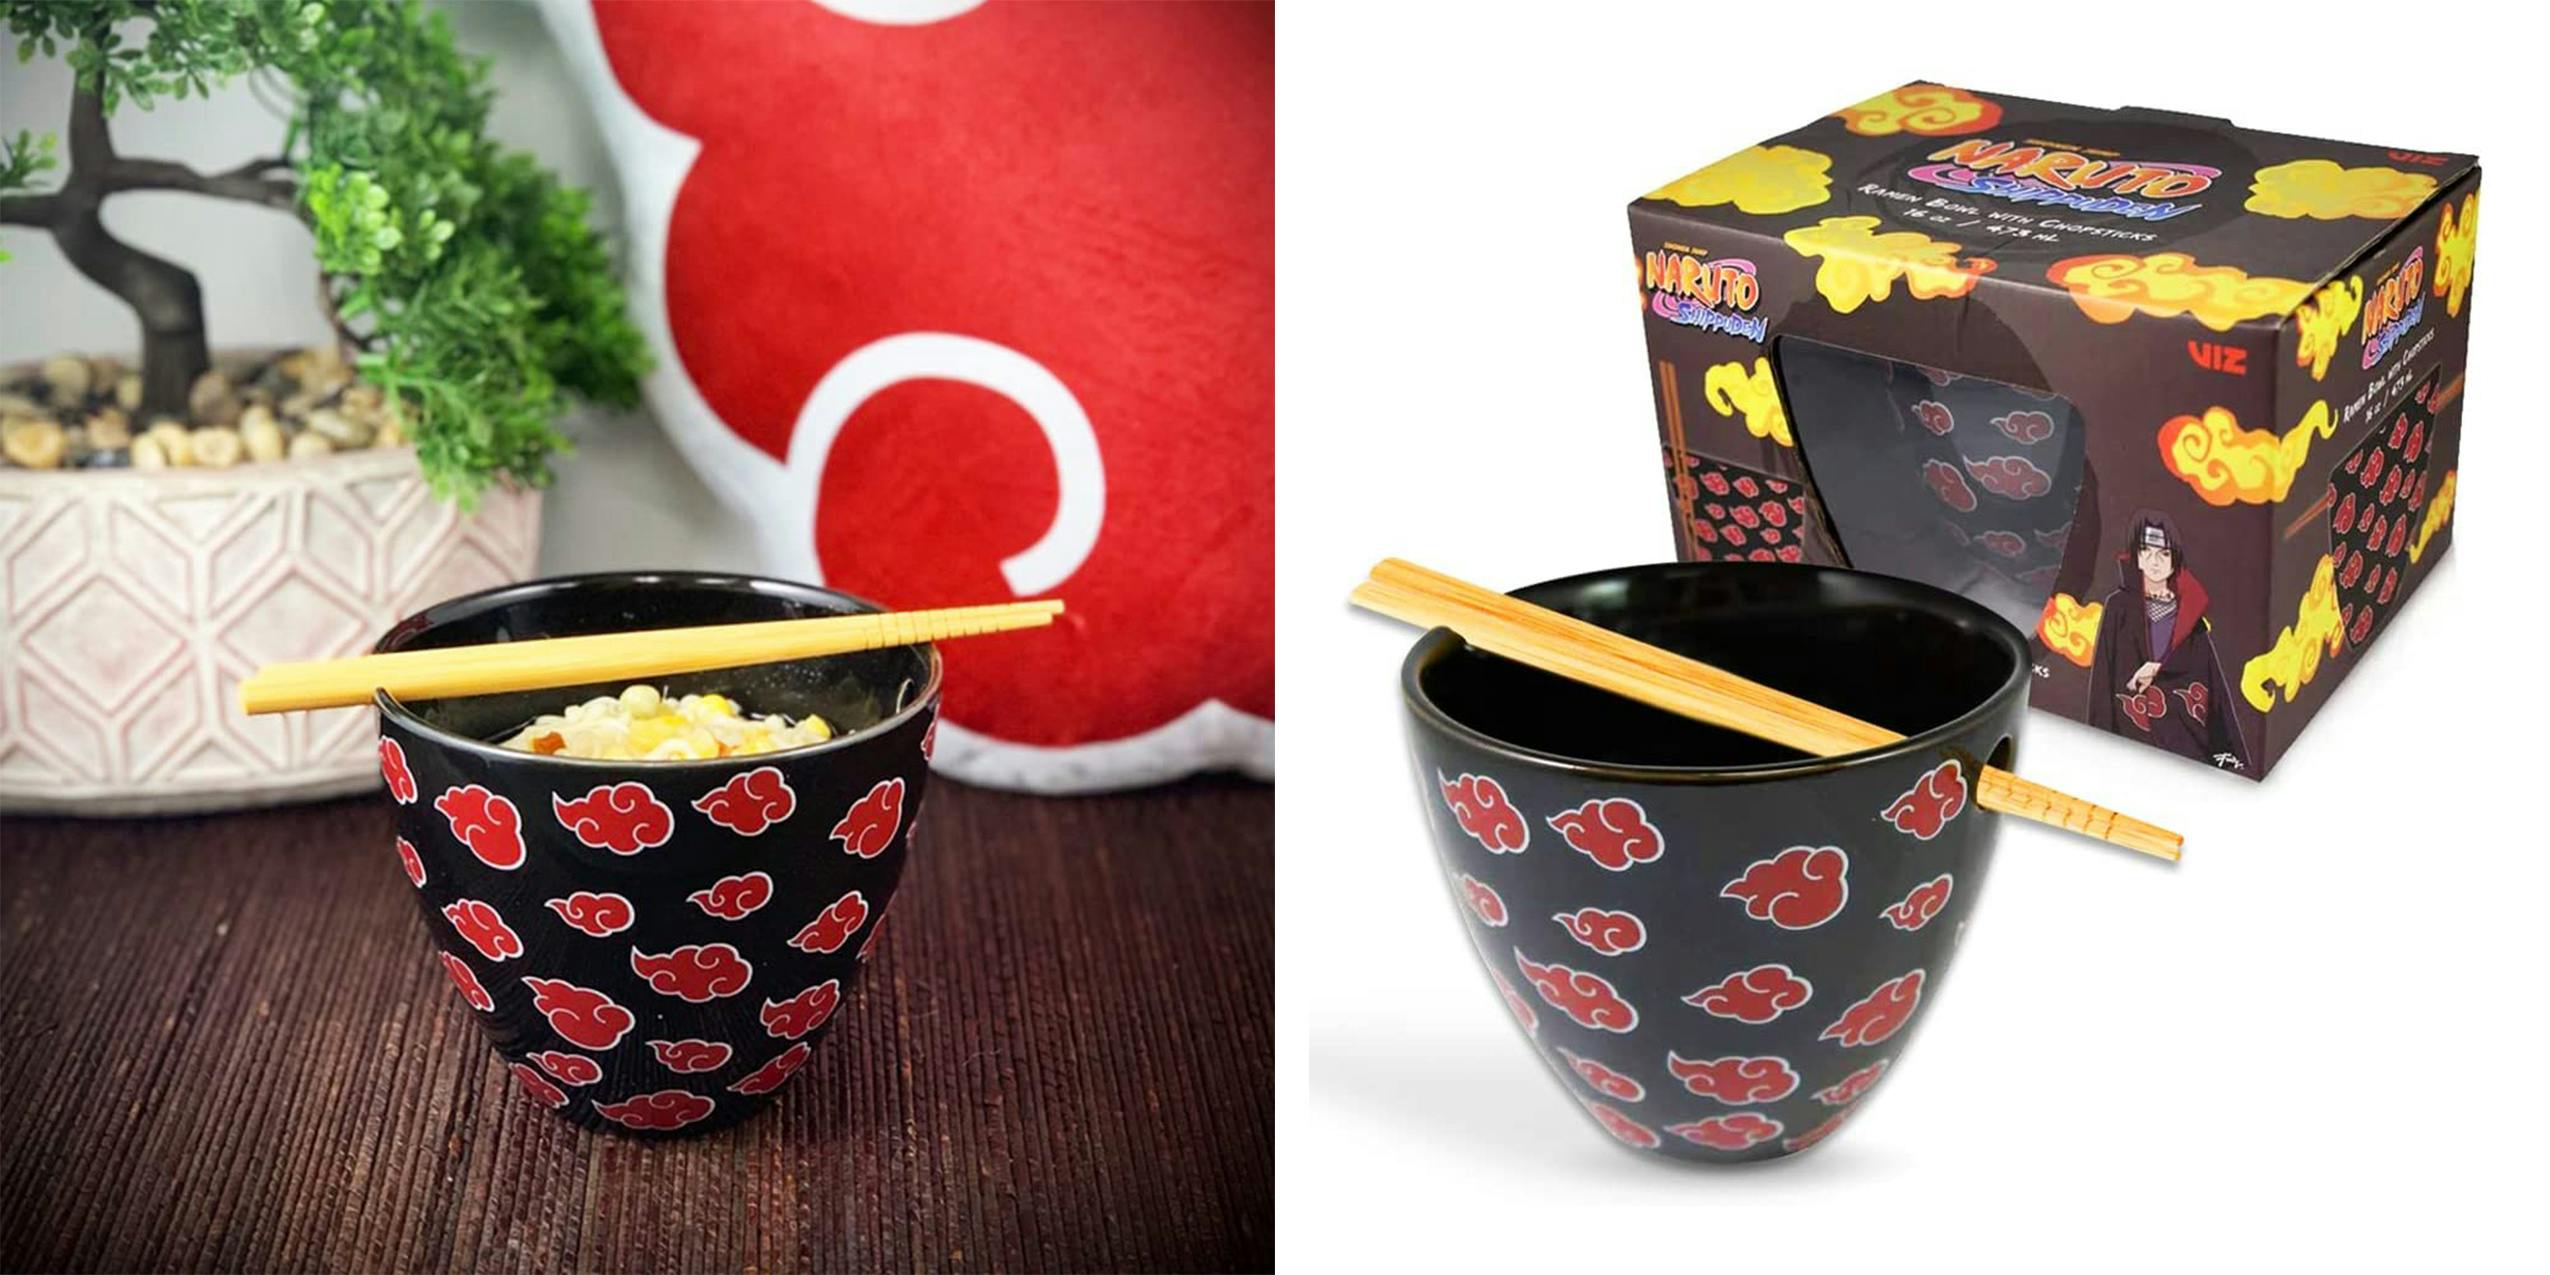 A Naruto Ramen bowl filled with rice on a desk along with the empty bowl and its box.